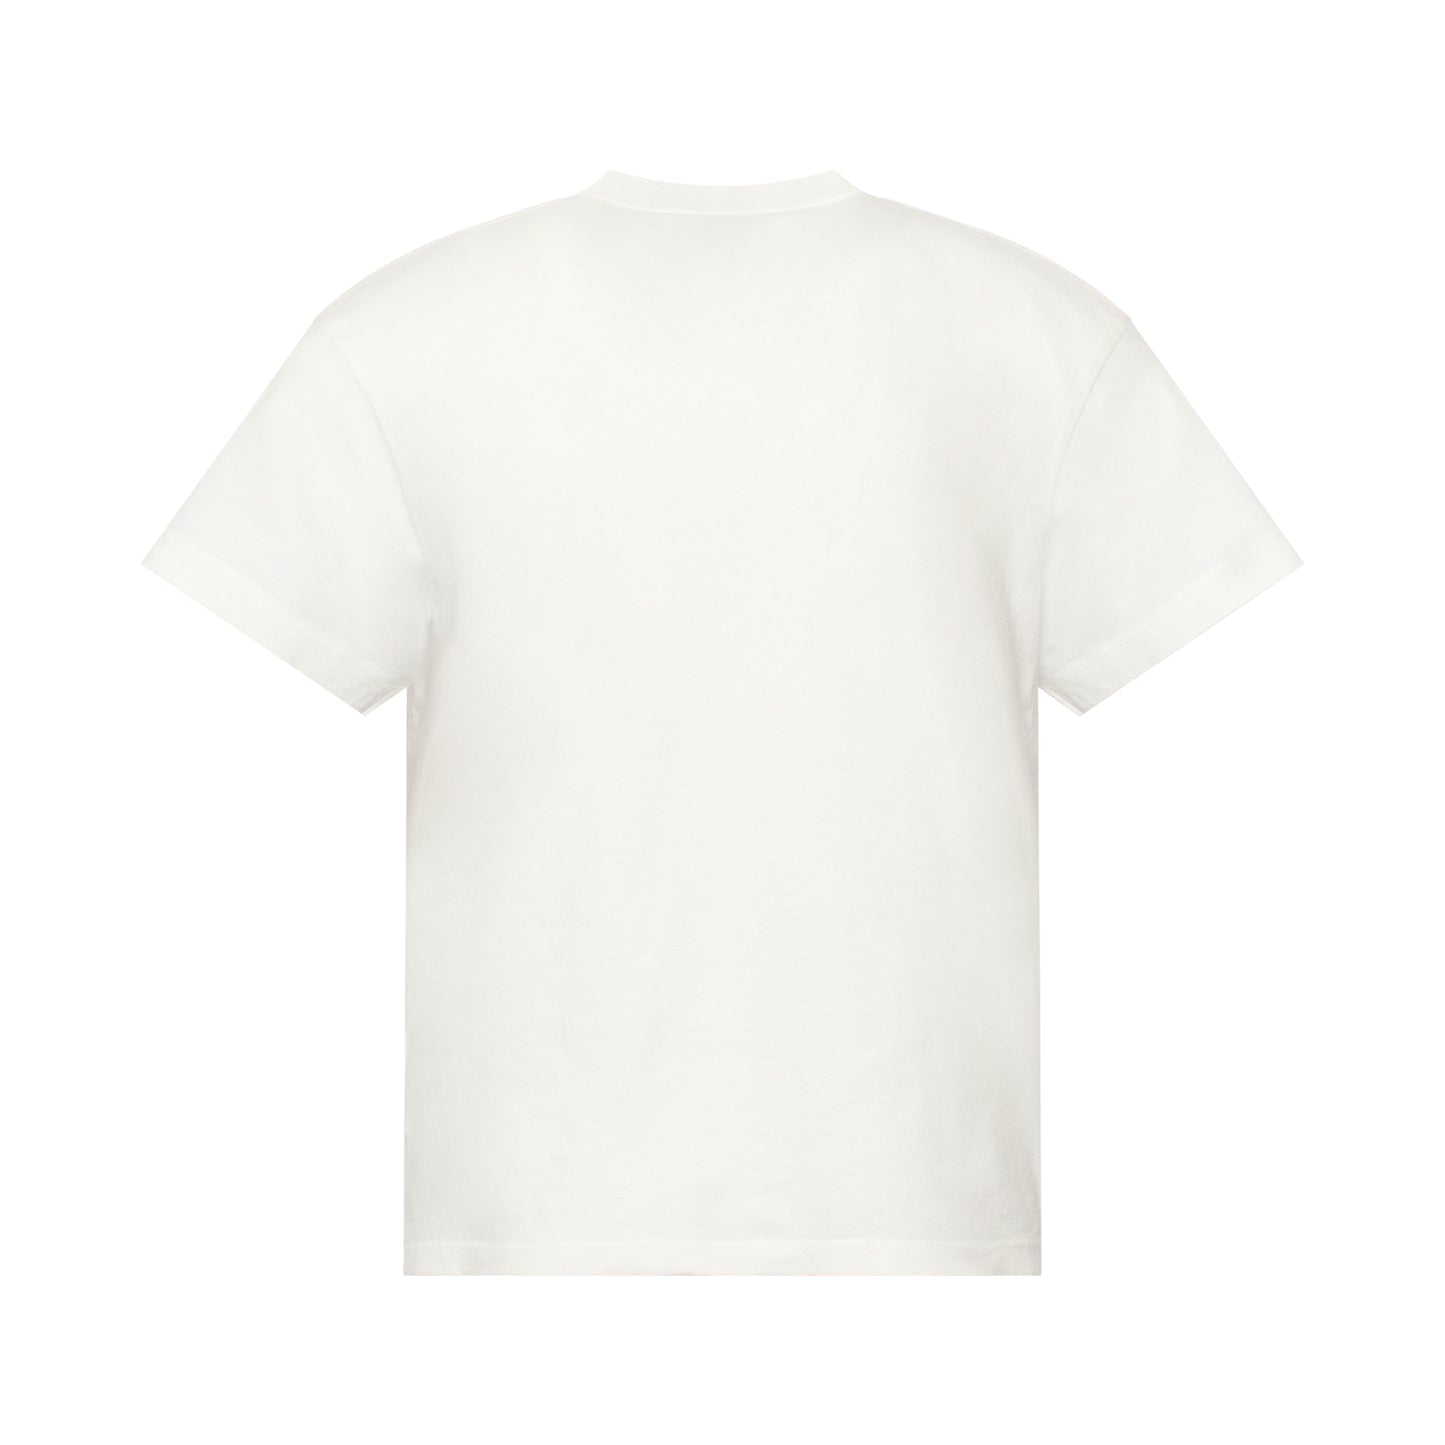 Classic 3 Pack T-Shirts in White